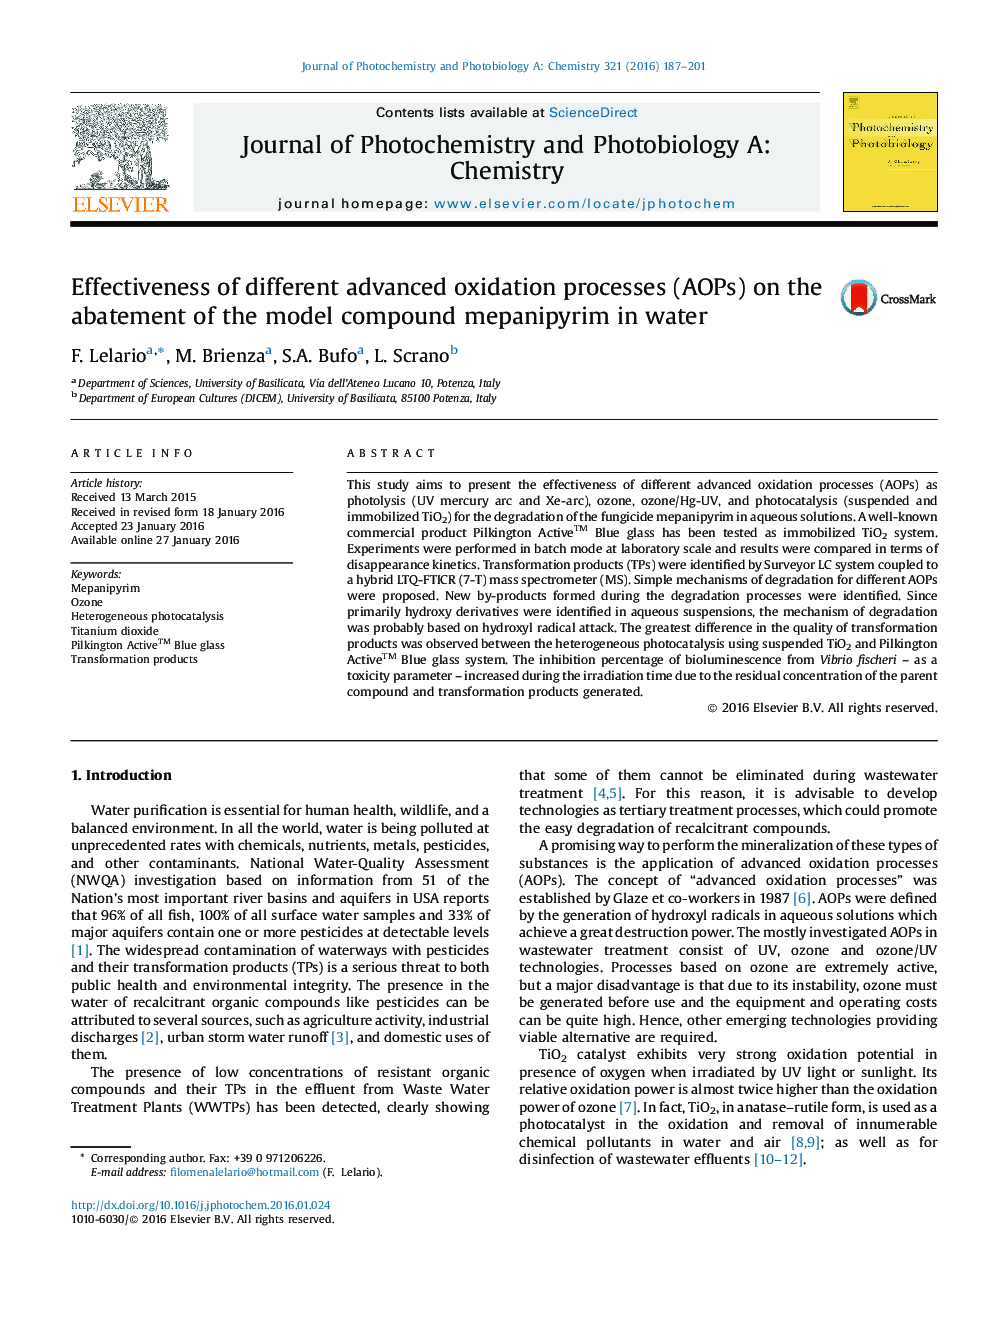 Effectiveness of different advanced oxidation processes (AOPs) on the abatement of the model compound mepanipyrim in water